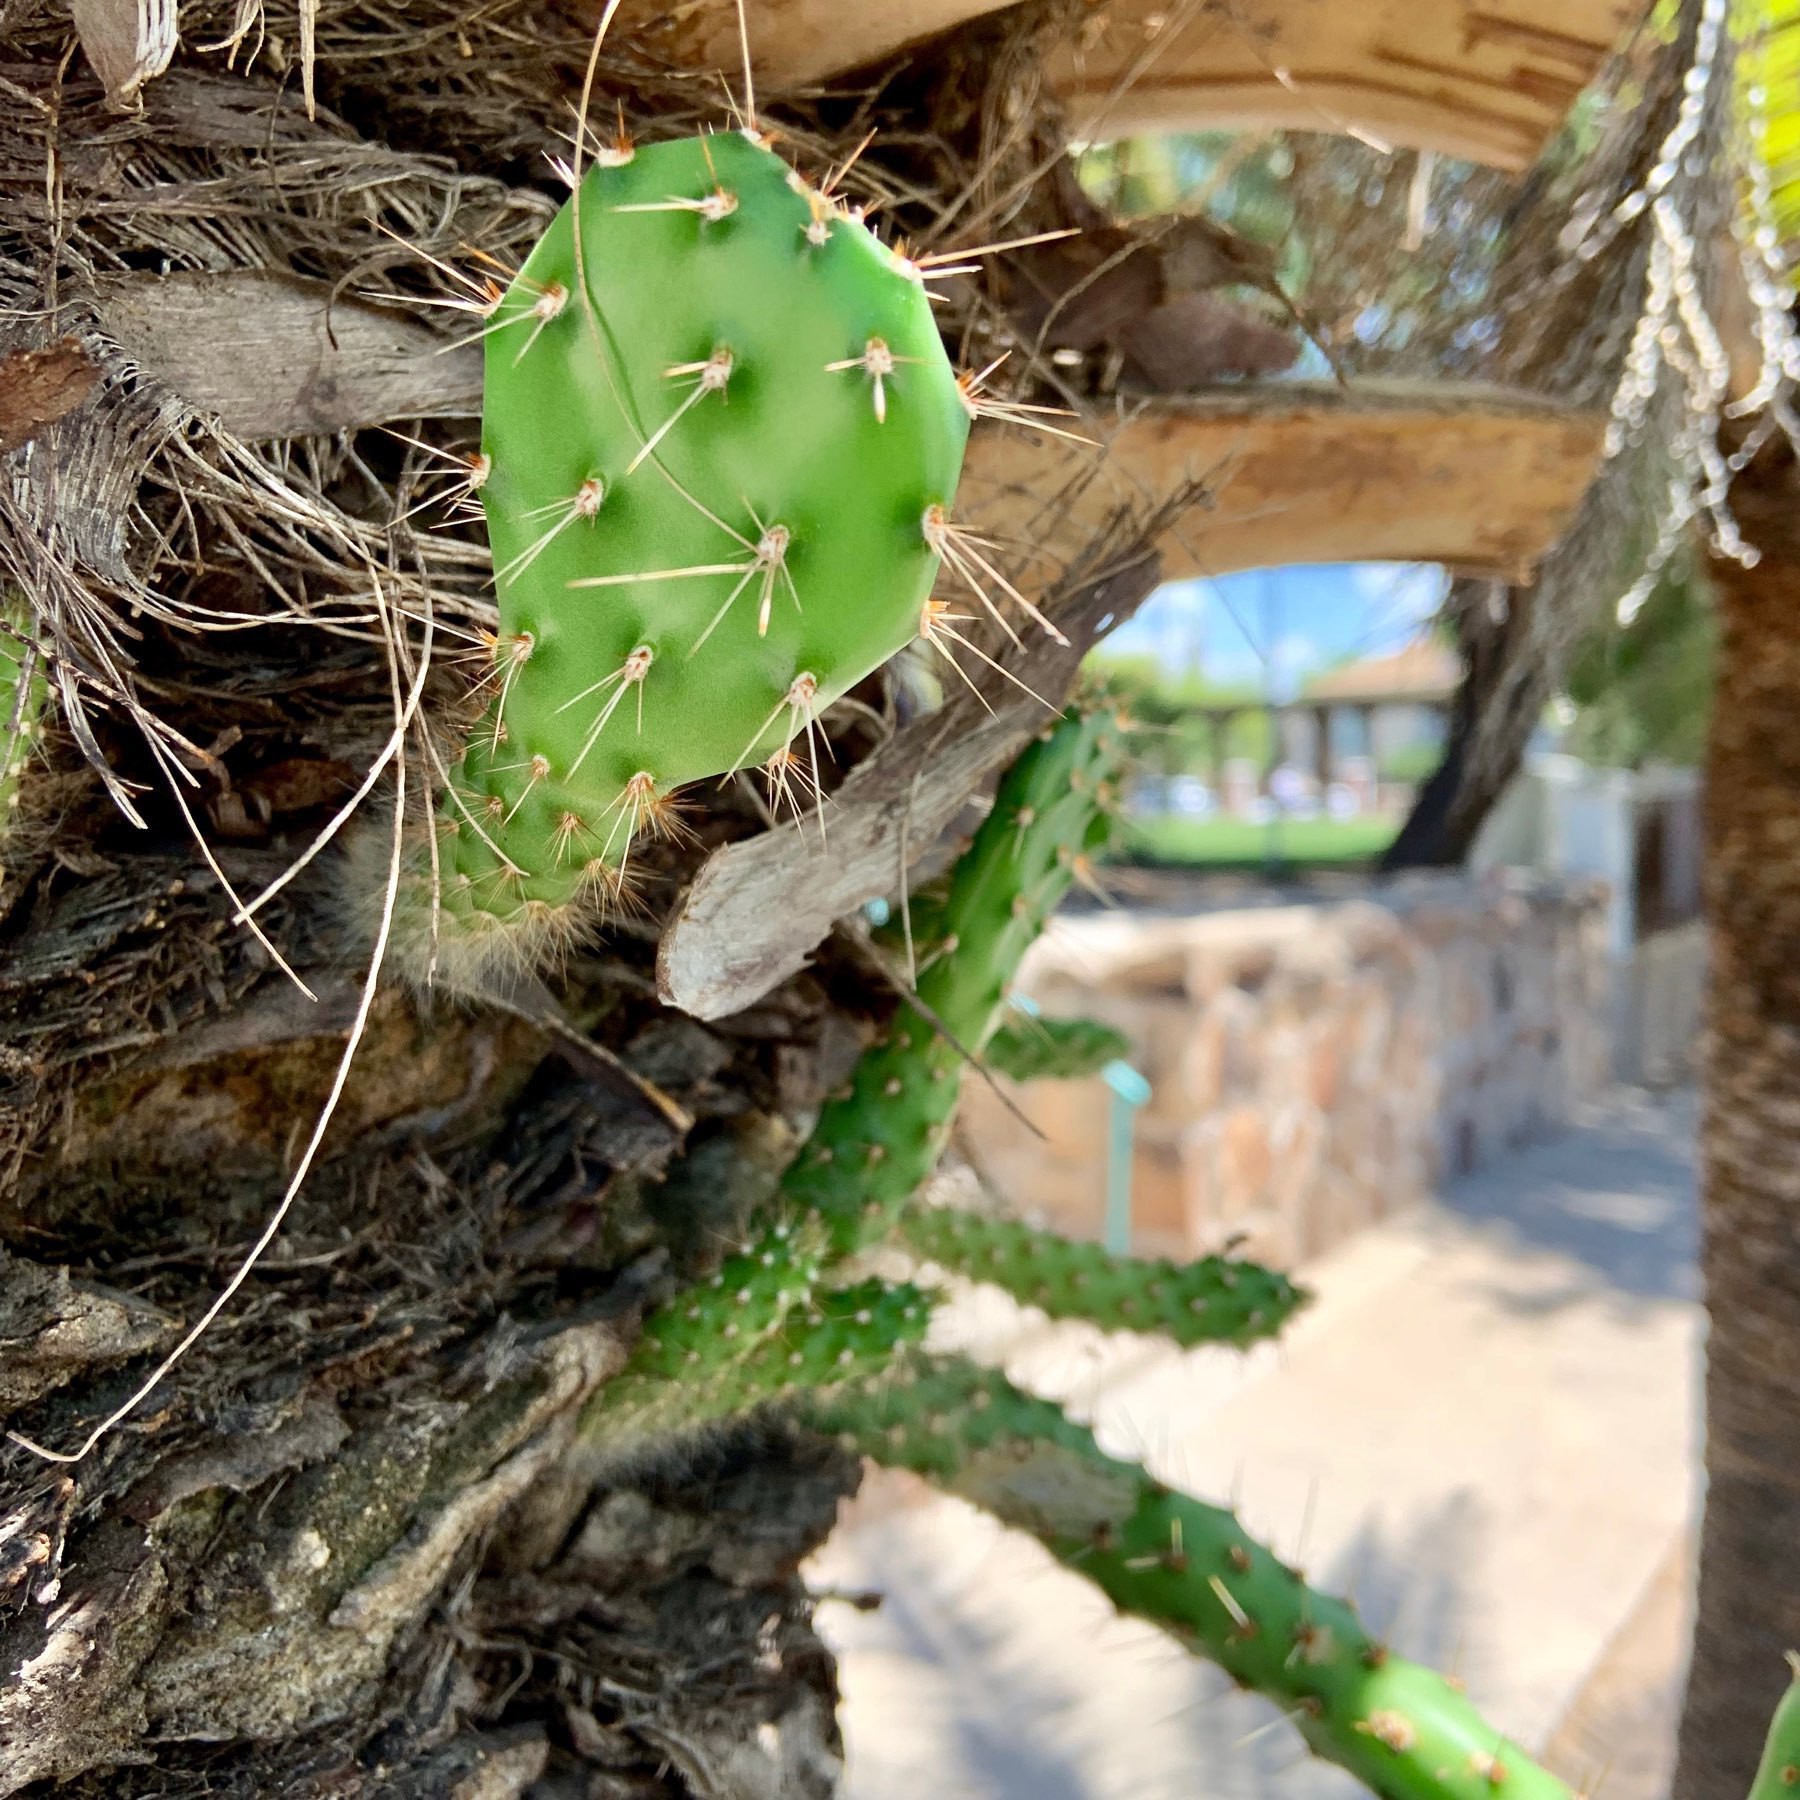 Prickly pear growing on the side of a palm tree